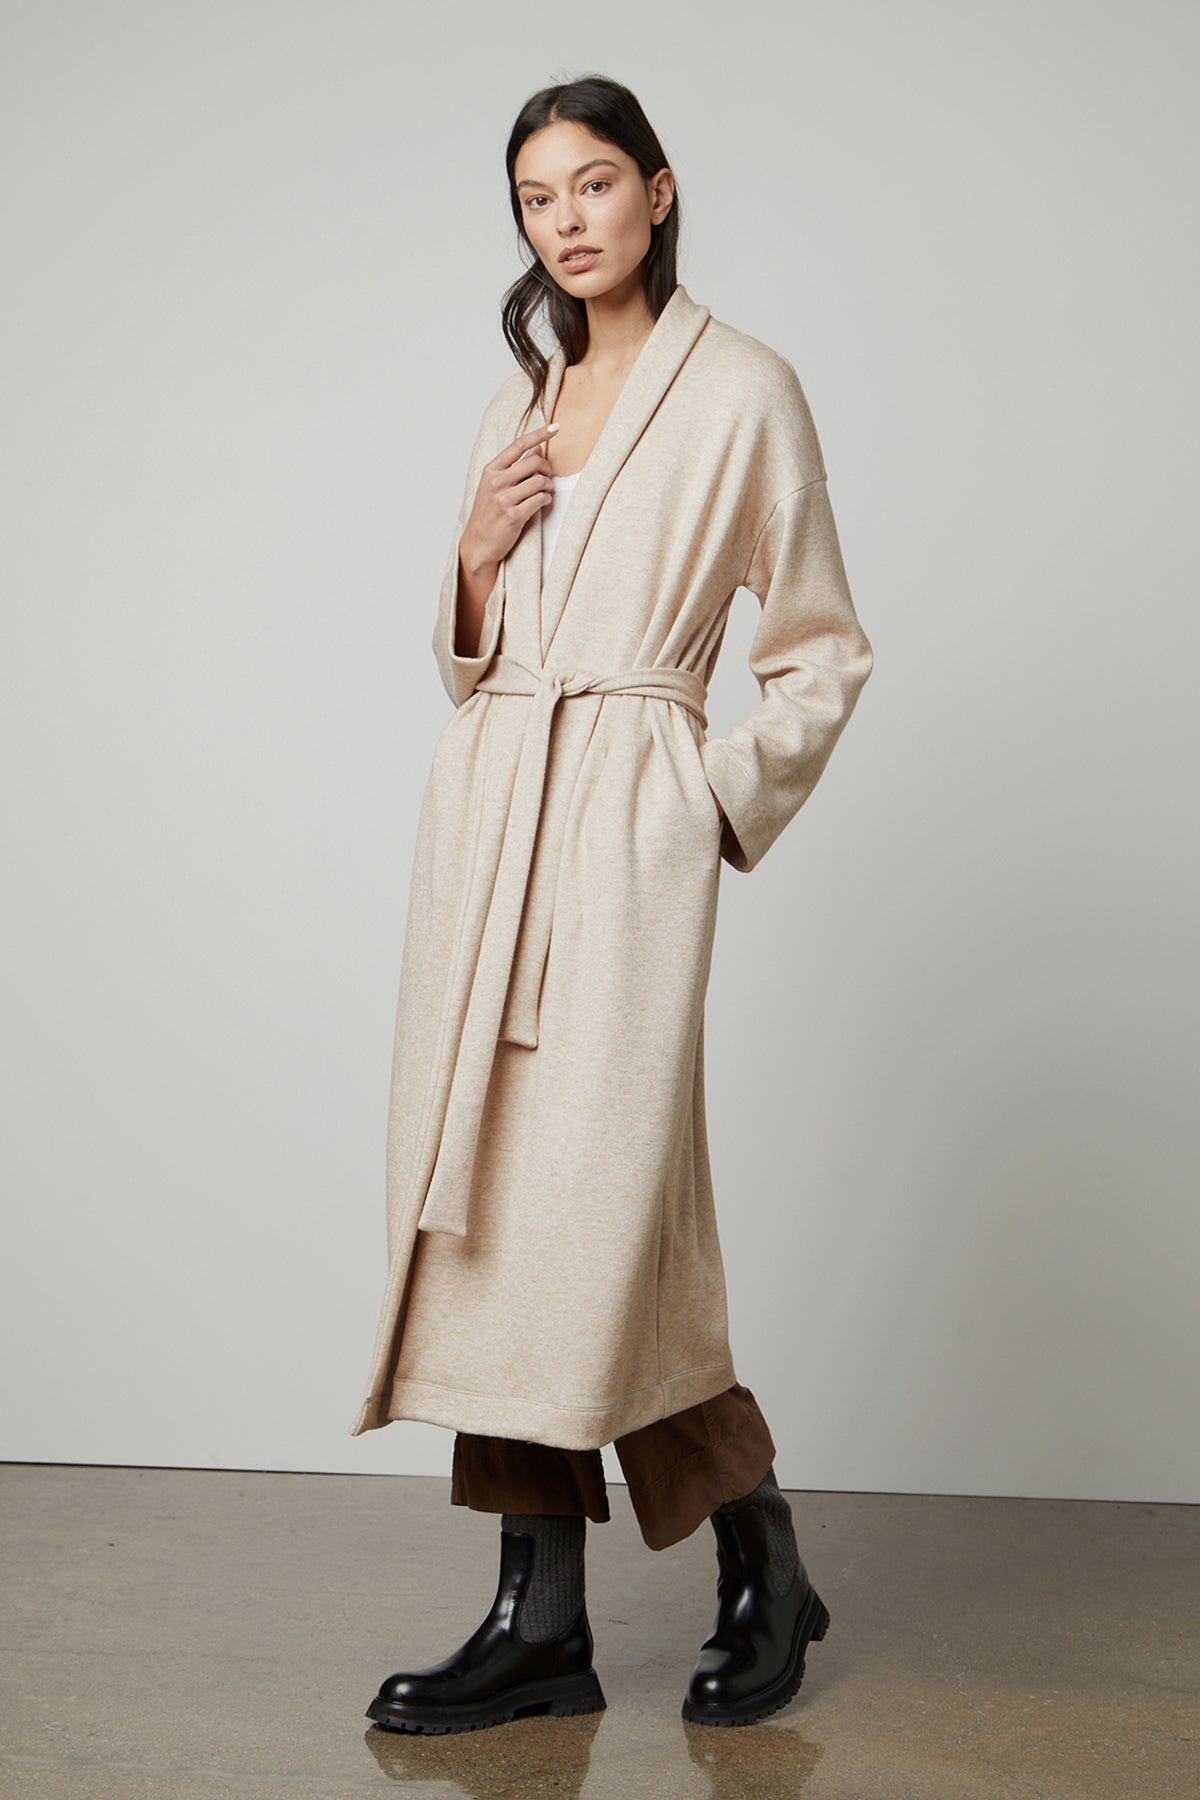 The model is wearing a cozy fabric beige Patricia Double Knit Duster Cardigan with a belt by Velvet by Graham & Spencer.-35503542108353